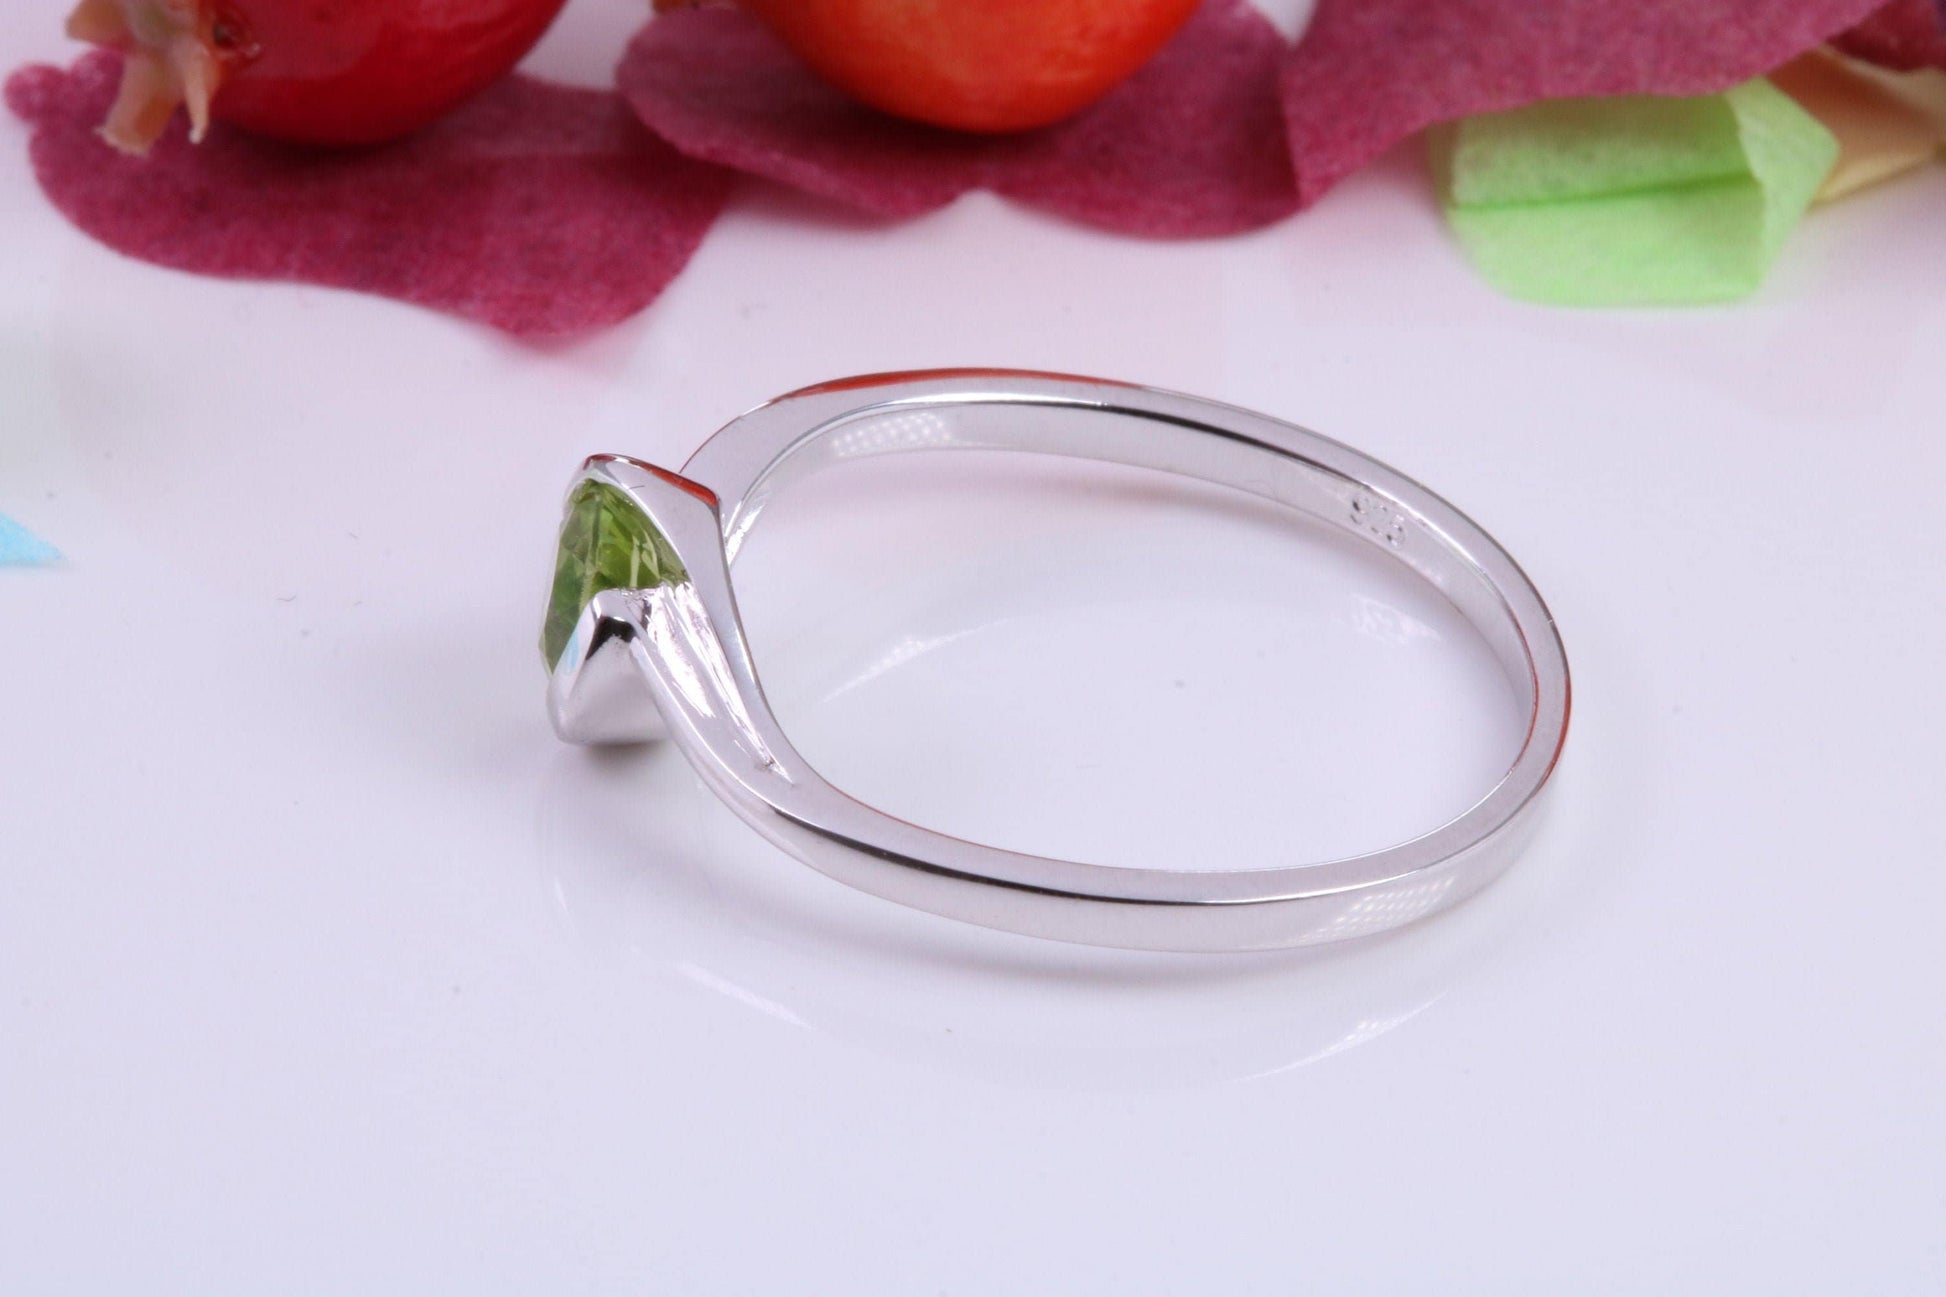 Natural Round cut Peridot set Sterling Silver Ring, Very Smooth Setting, August Birthstone